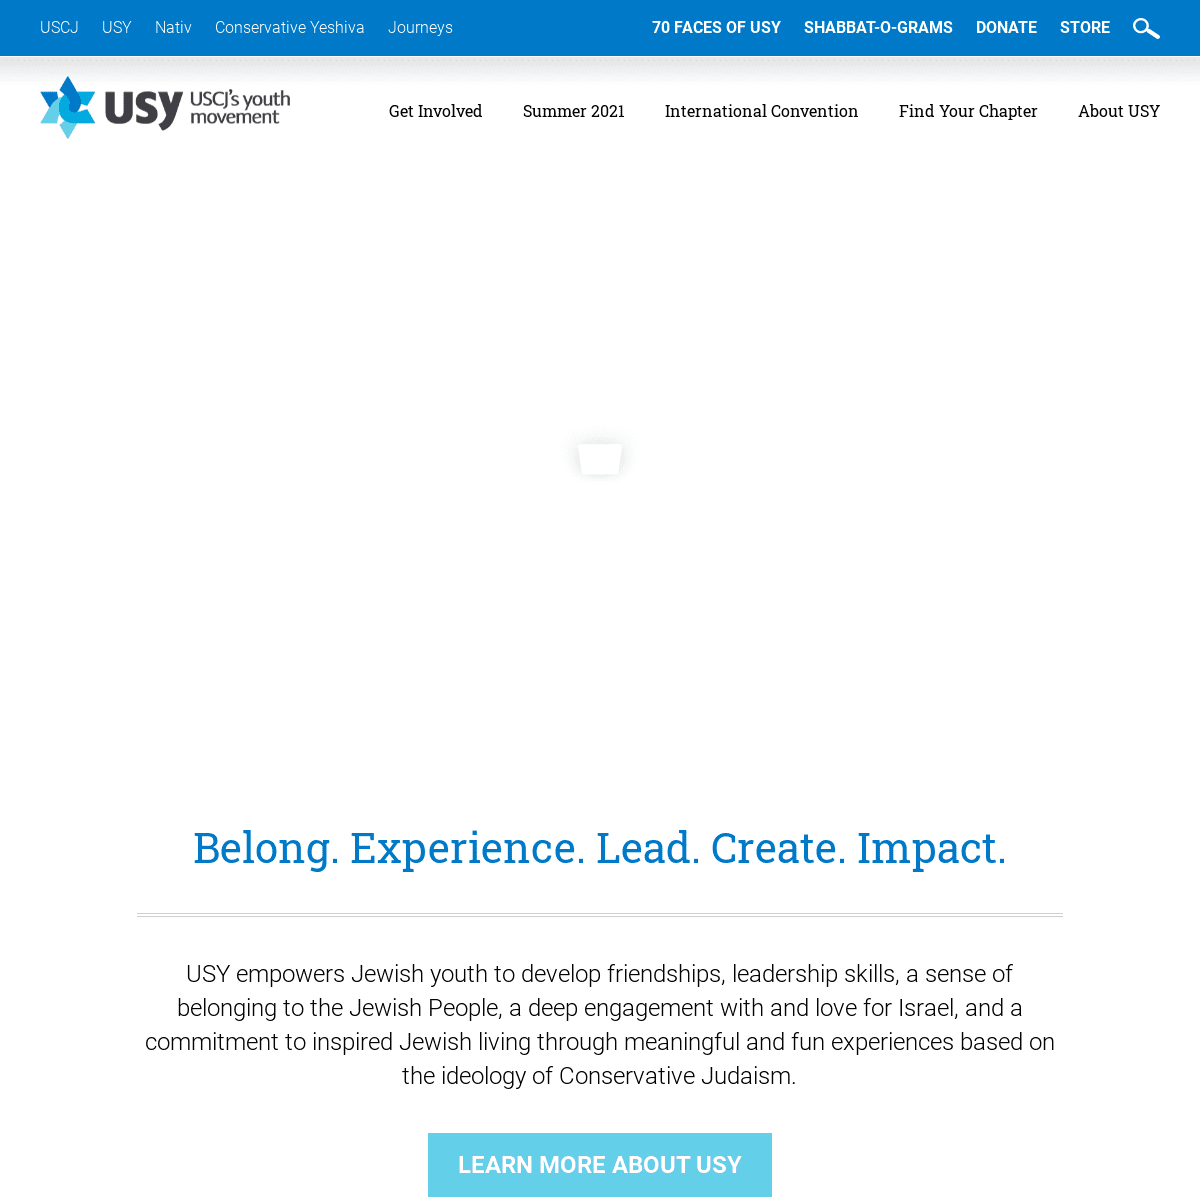 A complete backup of https://usy.org